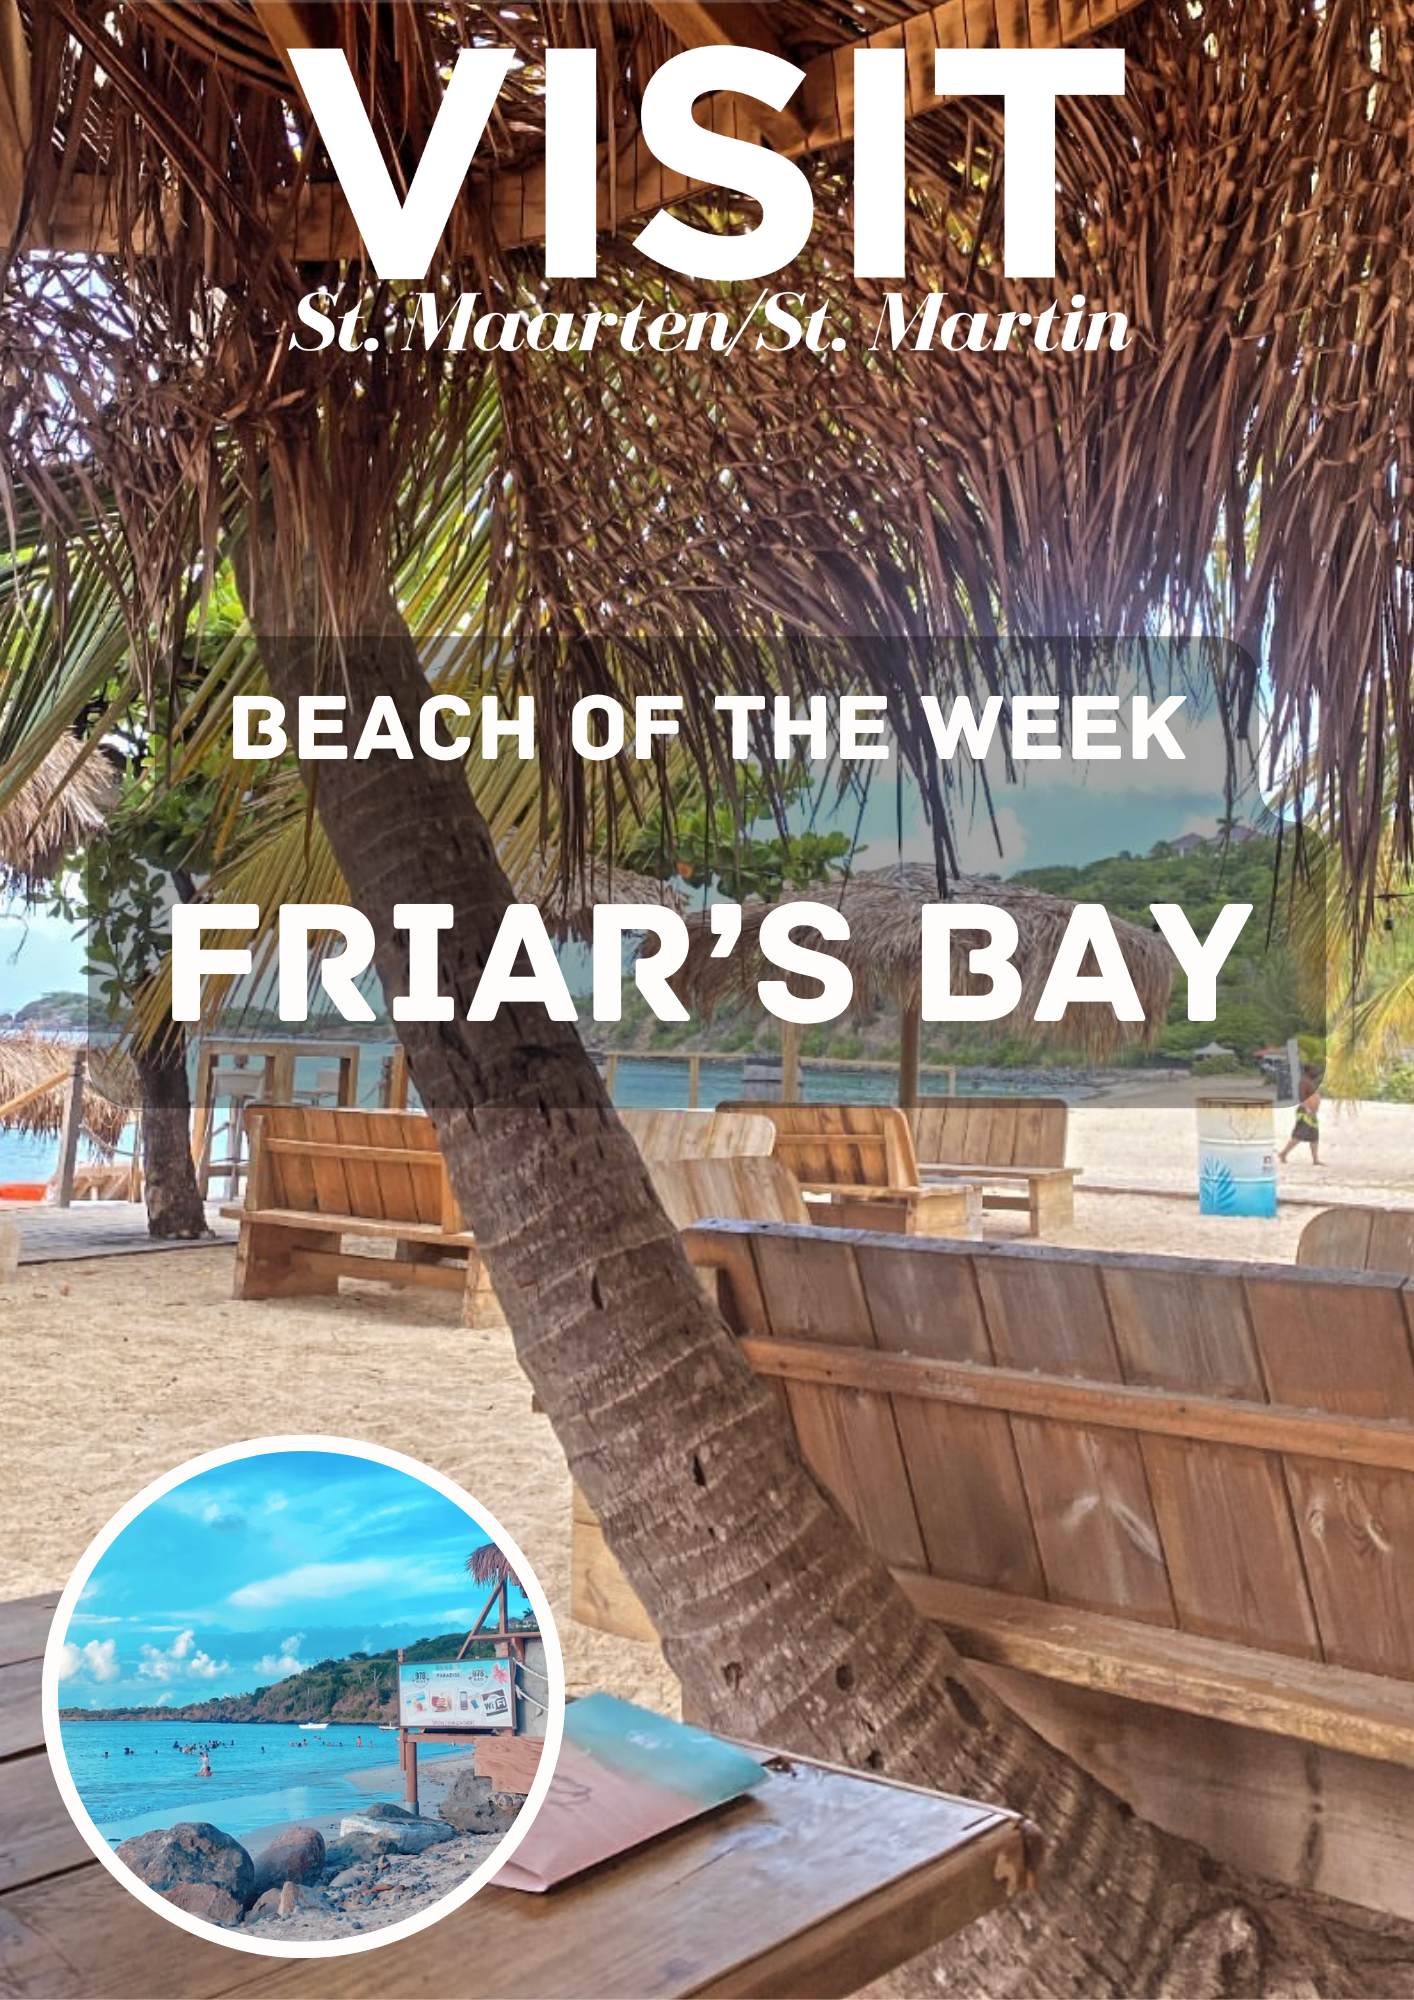 Beach of the week is Friar's Bay located on the French side of Sint Maarten